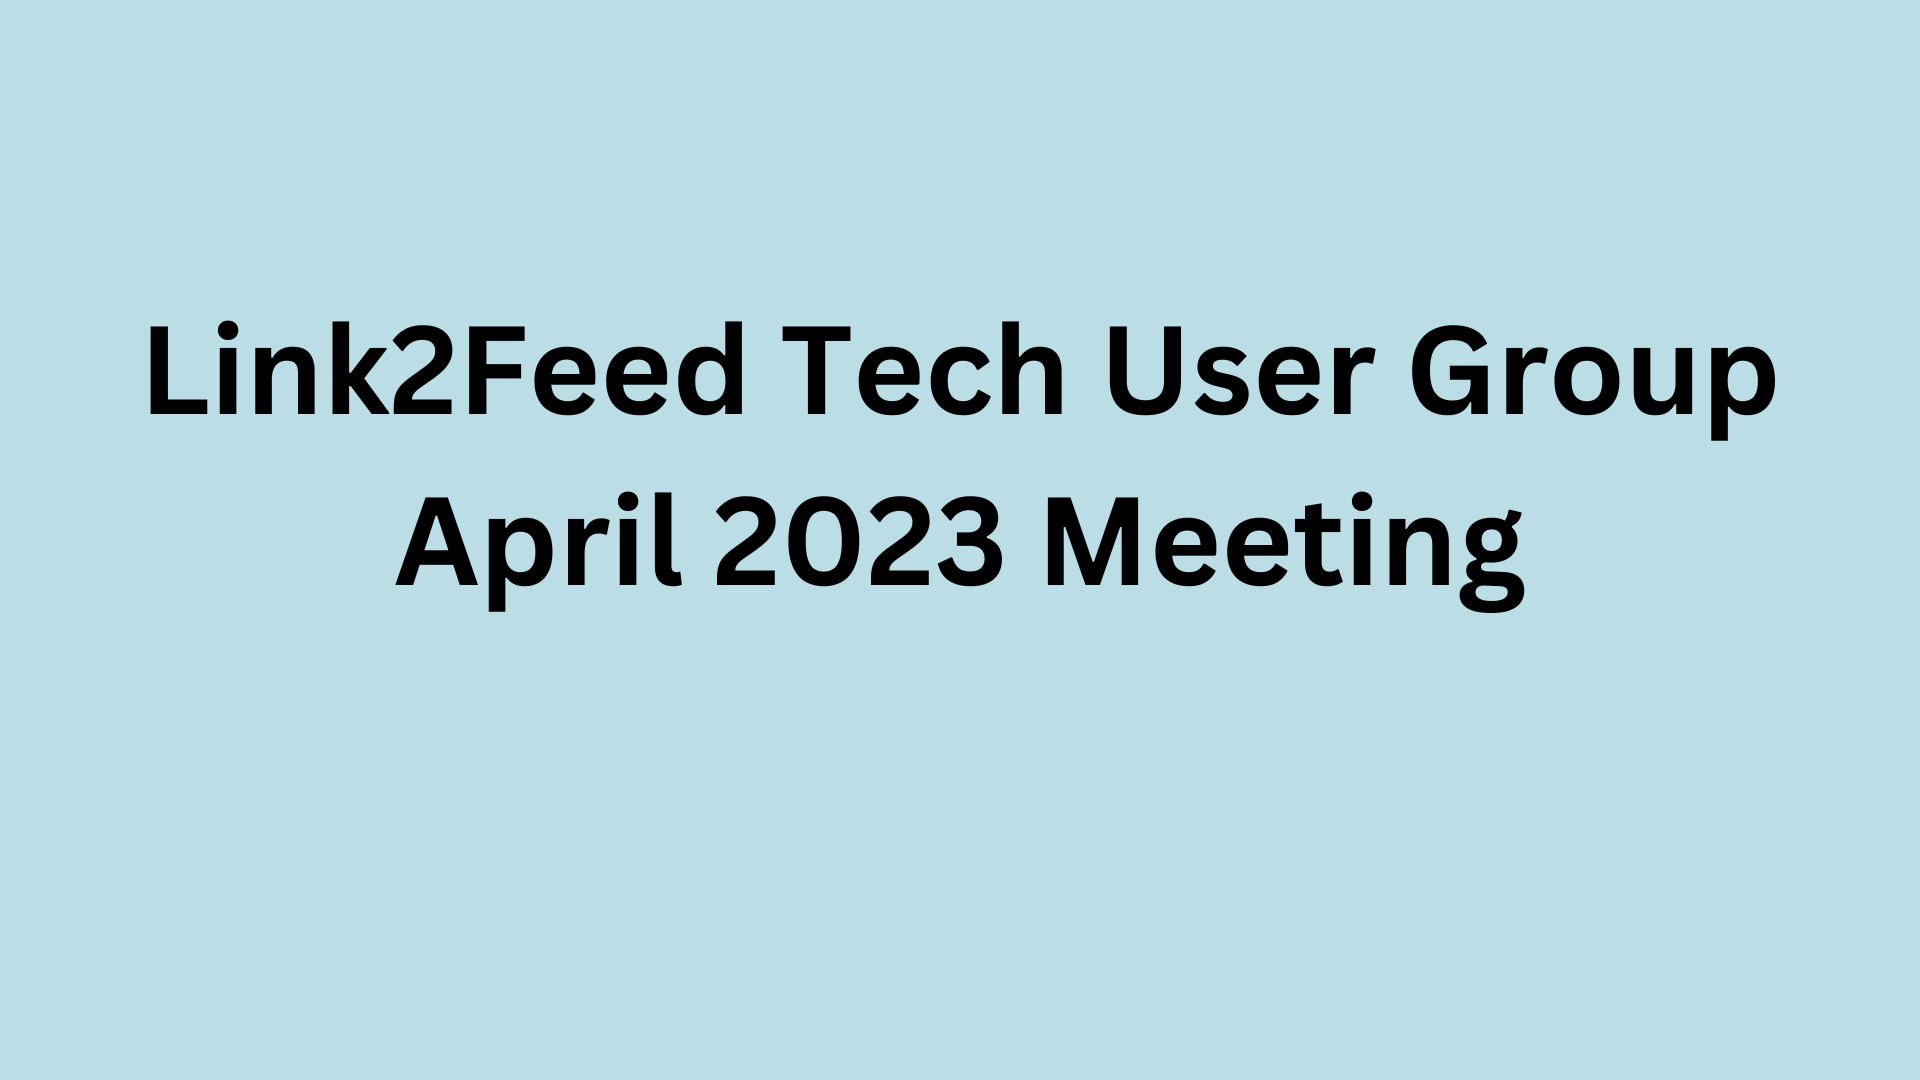 The Link2Feed Technology Using Group - April 2023 Meeting